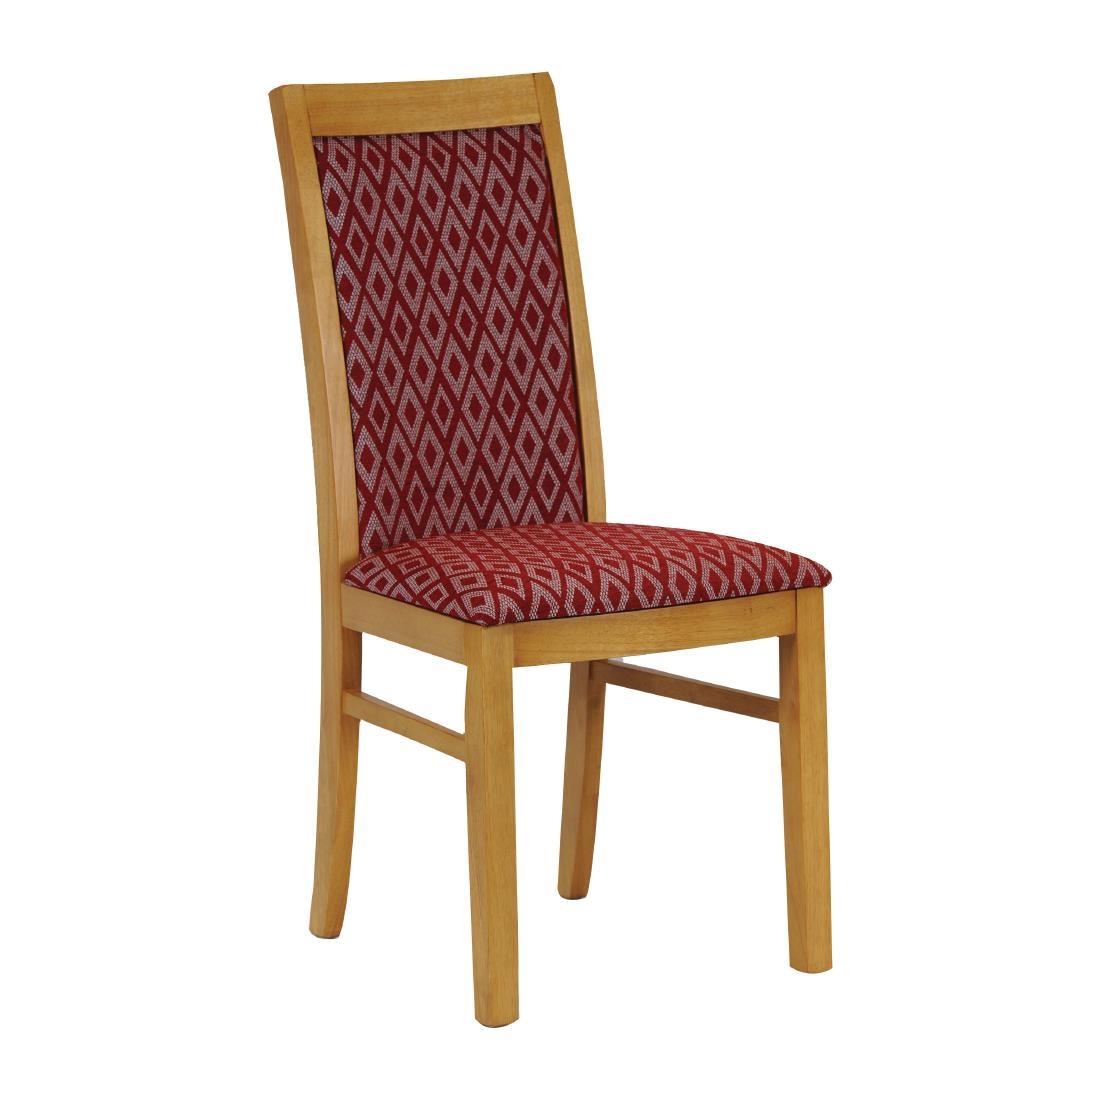 Brooklyn Padded Back Soft Oak Dining Chair with Red Diamond Padded Seat and Back (Pack of 2) - FT416  - 1